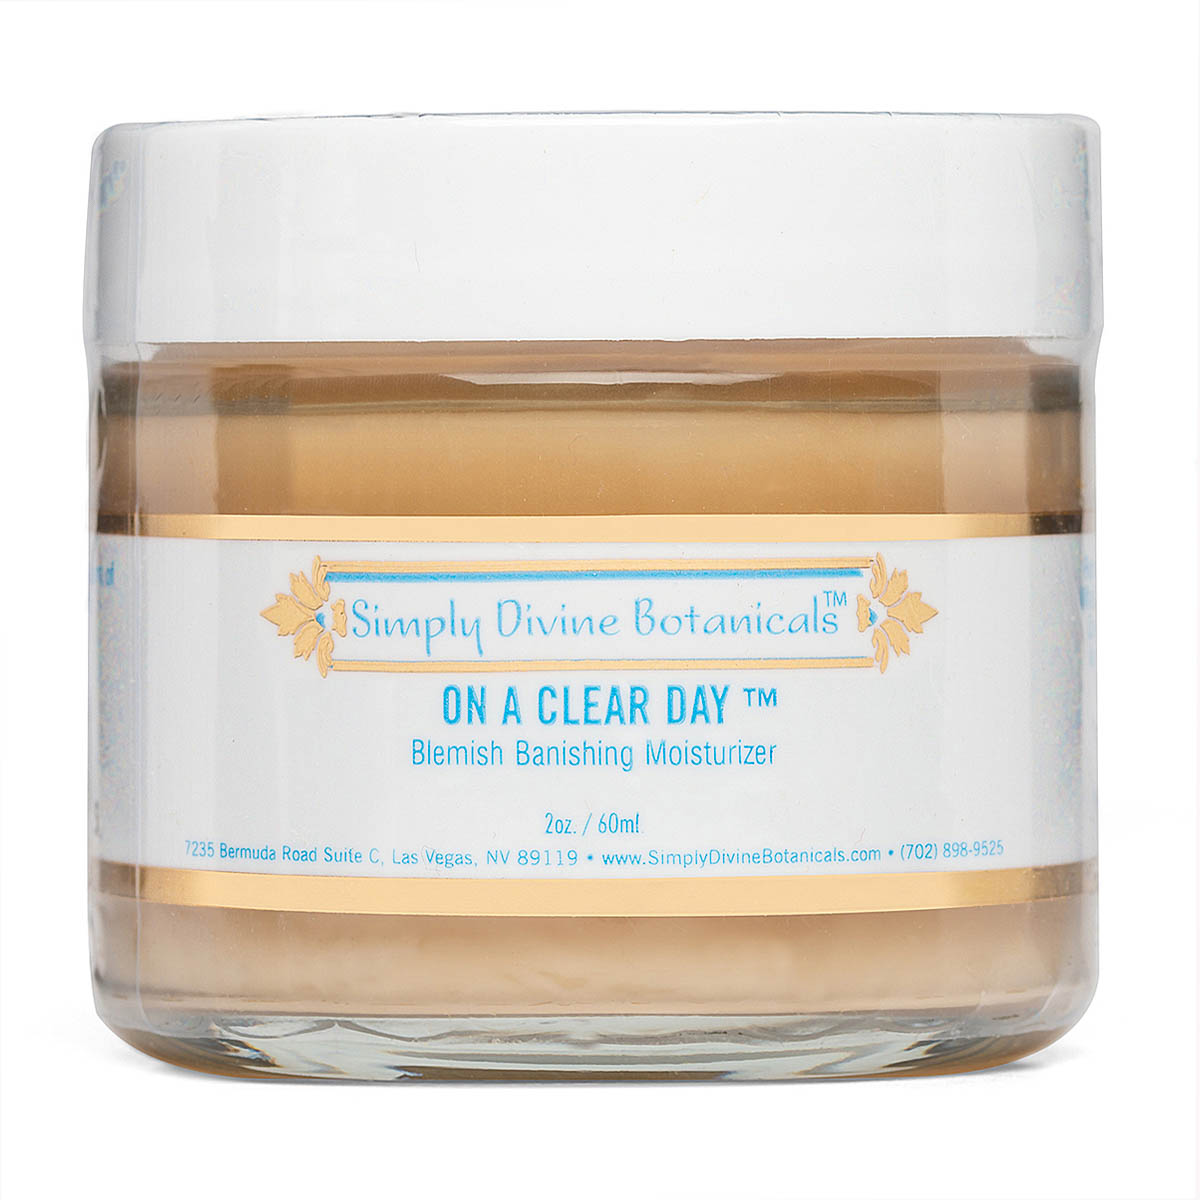 On A Clear Day Moisturizer | Simply Divine Botanicals | Raw Living UK | Skin Care &amp; Beauty | Simply Divine Botanicals On a Clear Day Natural Moisturiser is a Blemish Banishing Cream. Made with Organic Whole Leaf Aloe, Brown Seaweed &amp; Essential Oils.